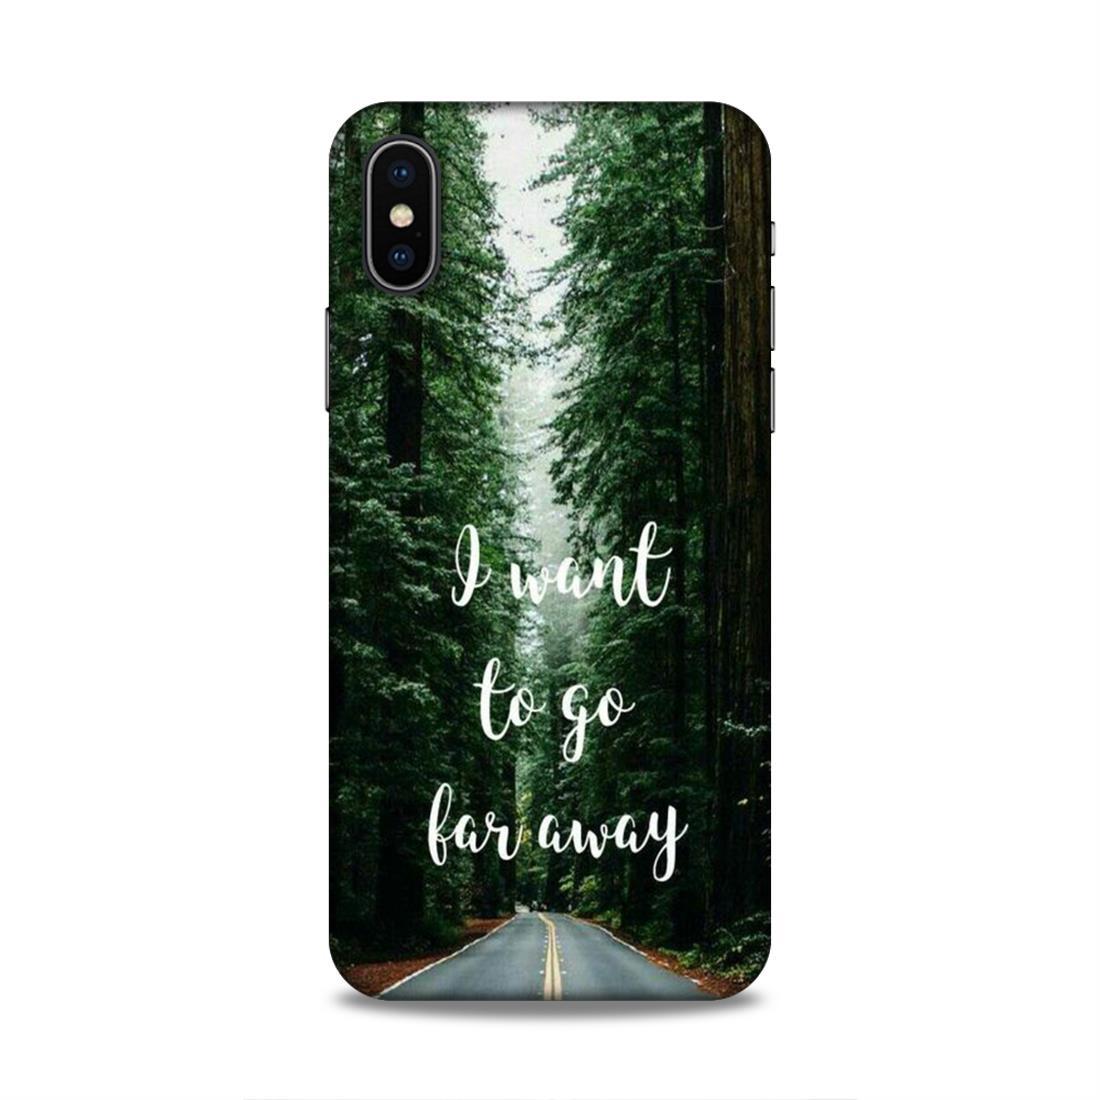 I Want To Go Far Away iPhone X Phone Cover